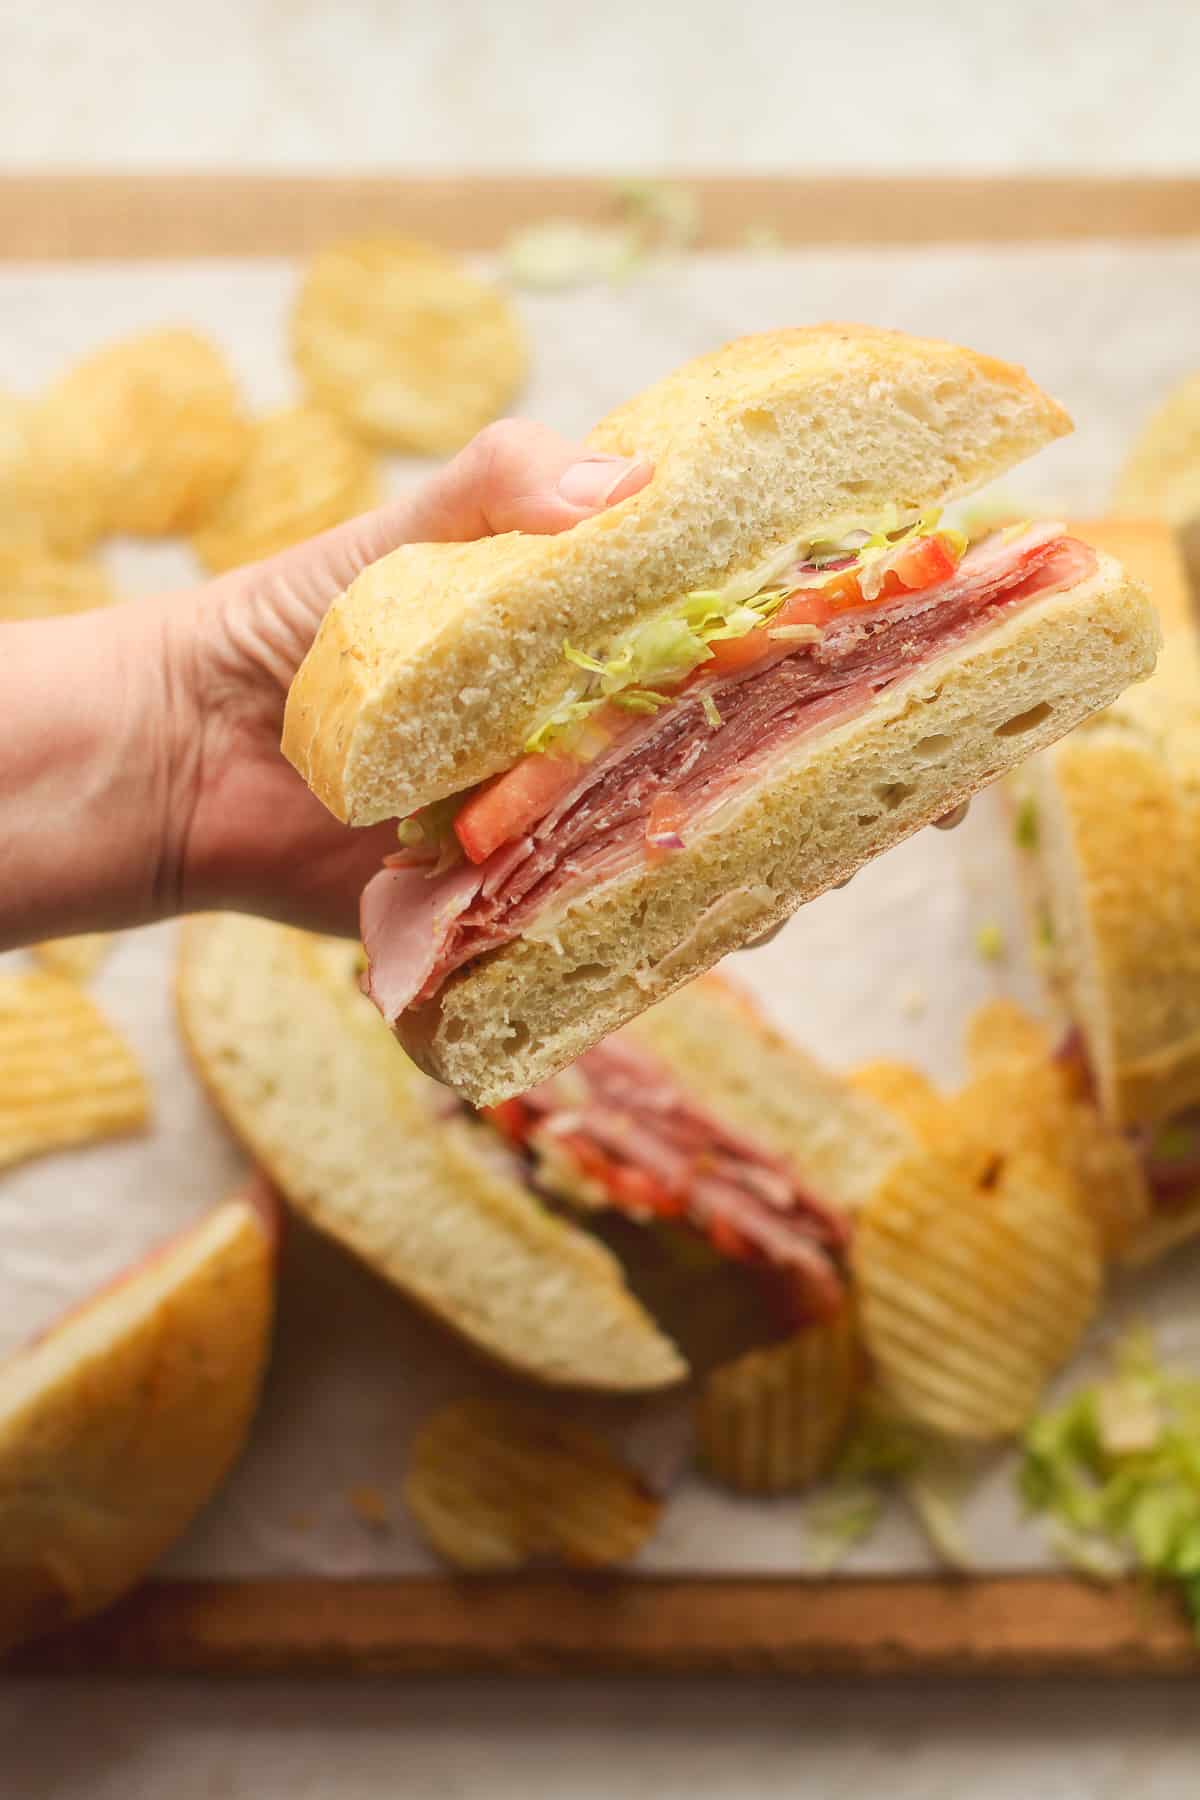 A hand holding a wedge of the Italian grinder sandwich.